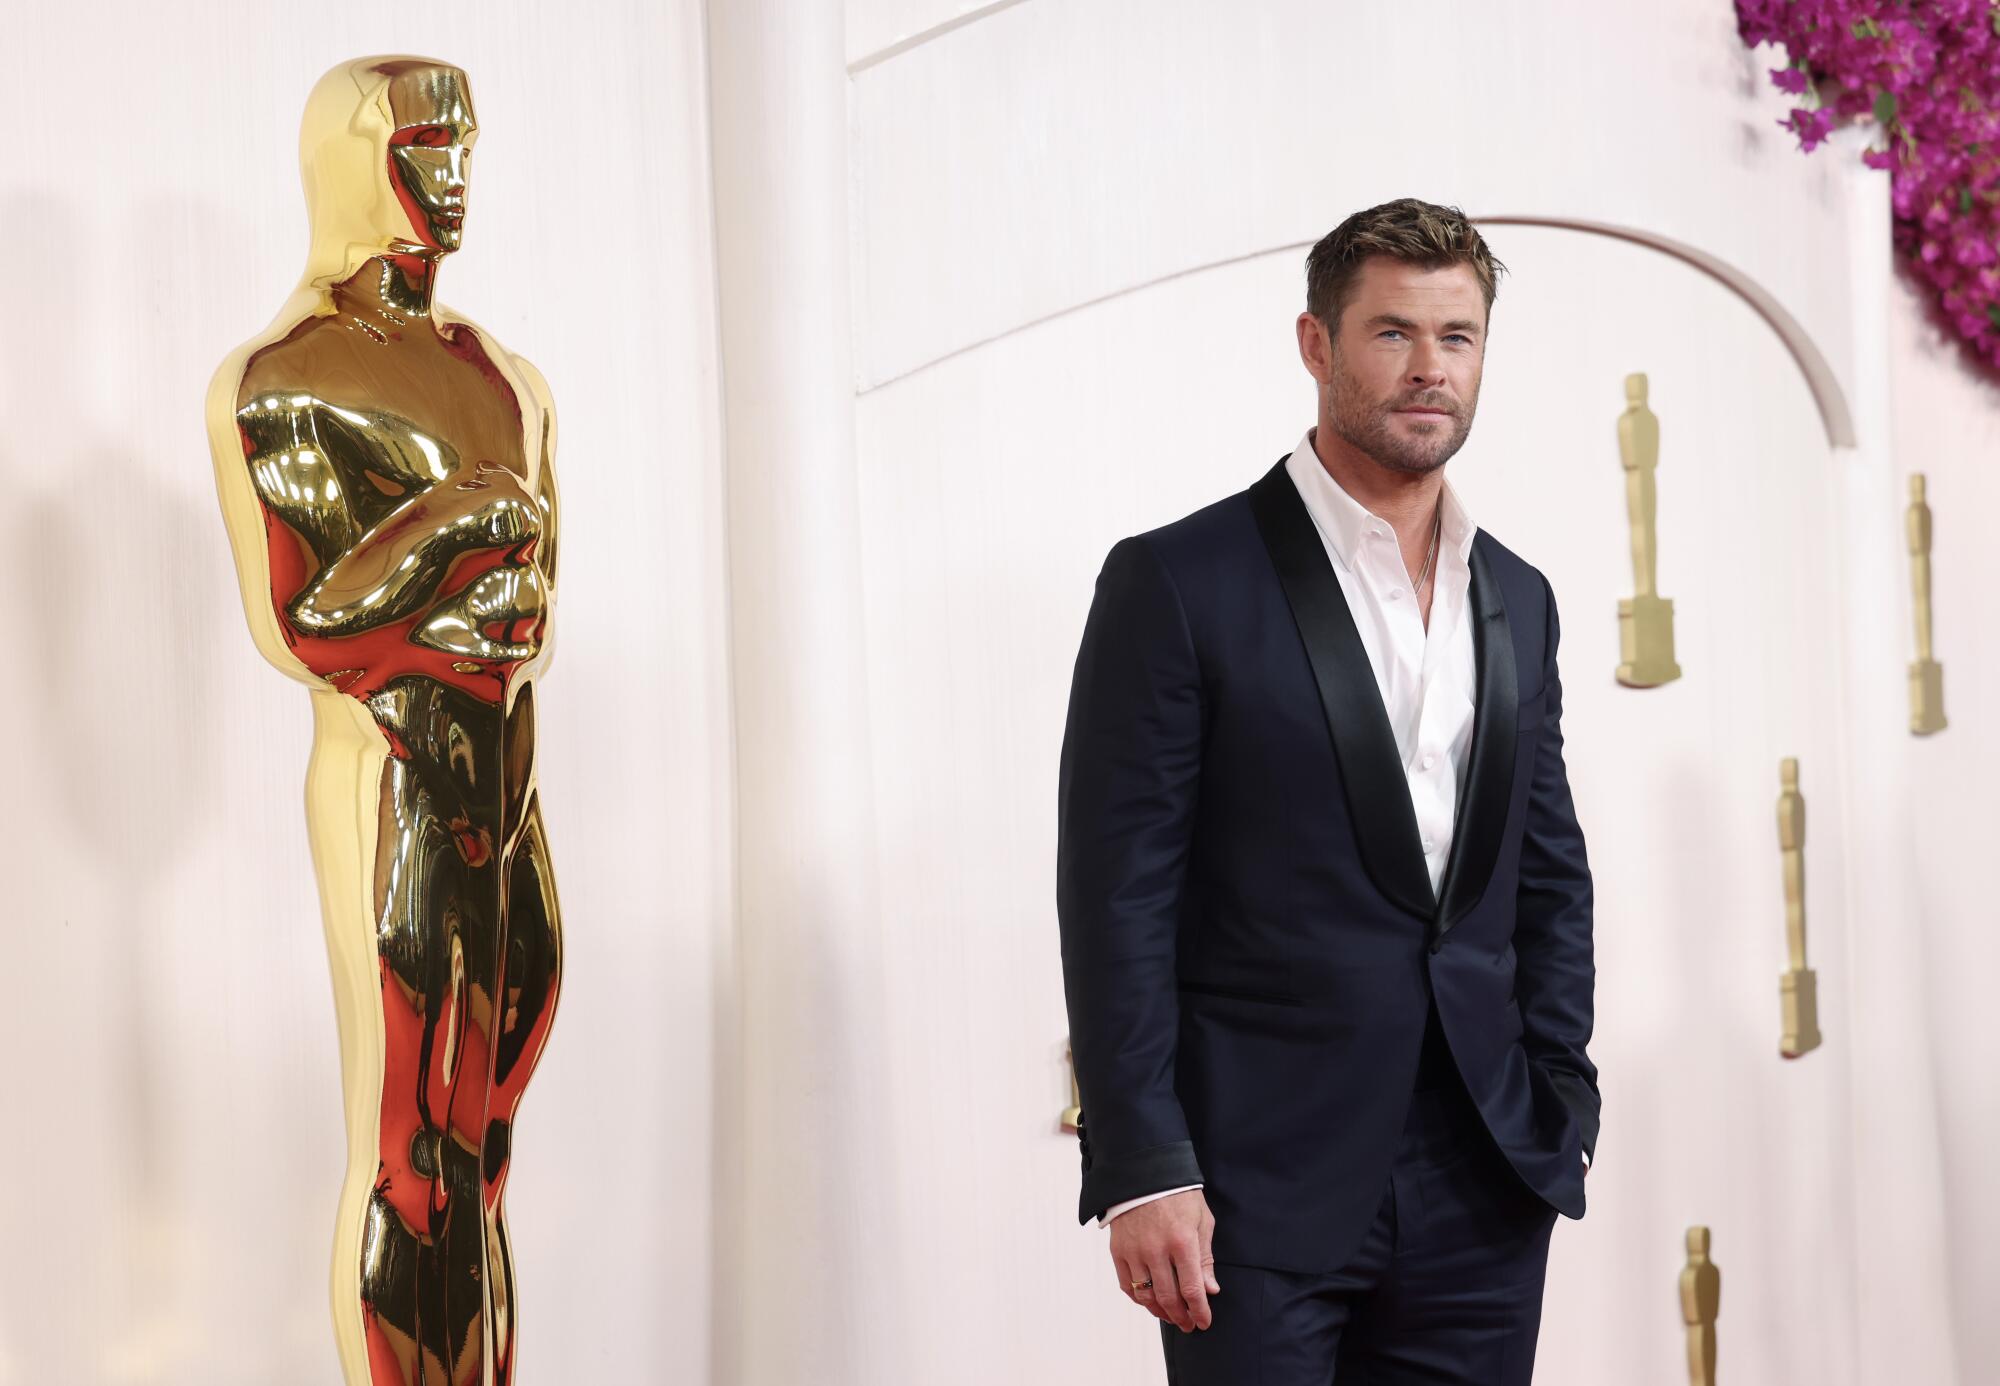 Chris Hemsworth wears a suit as he stands in front of an Oscar statue. 